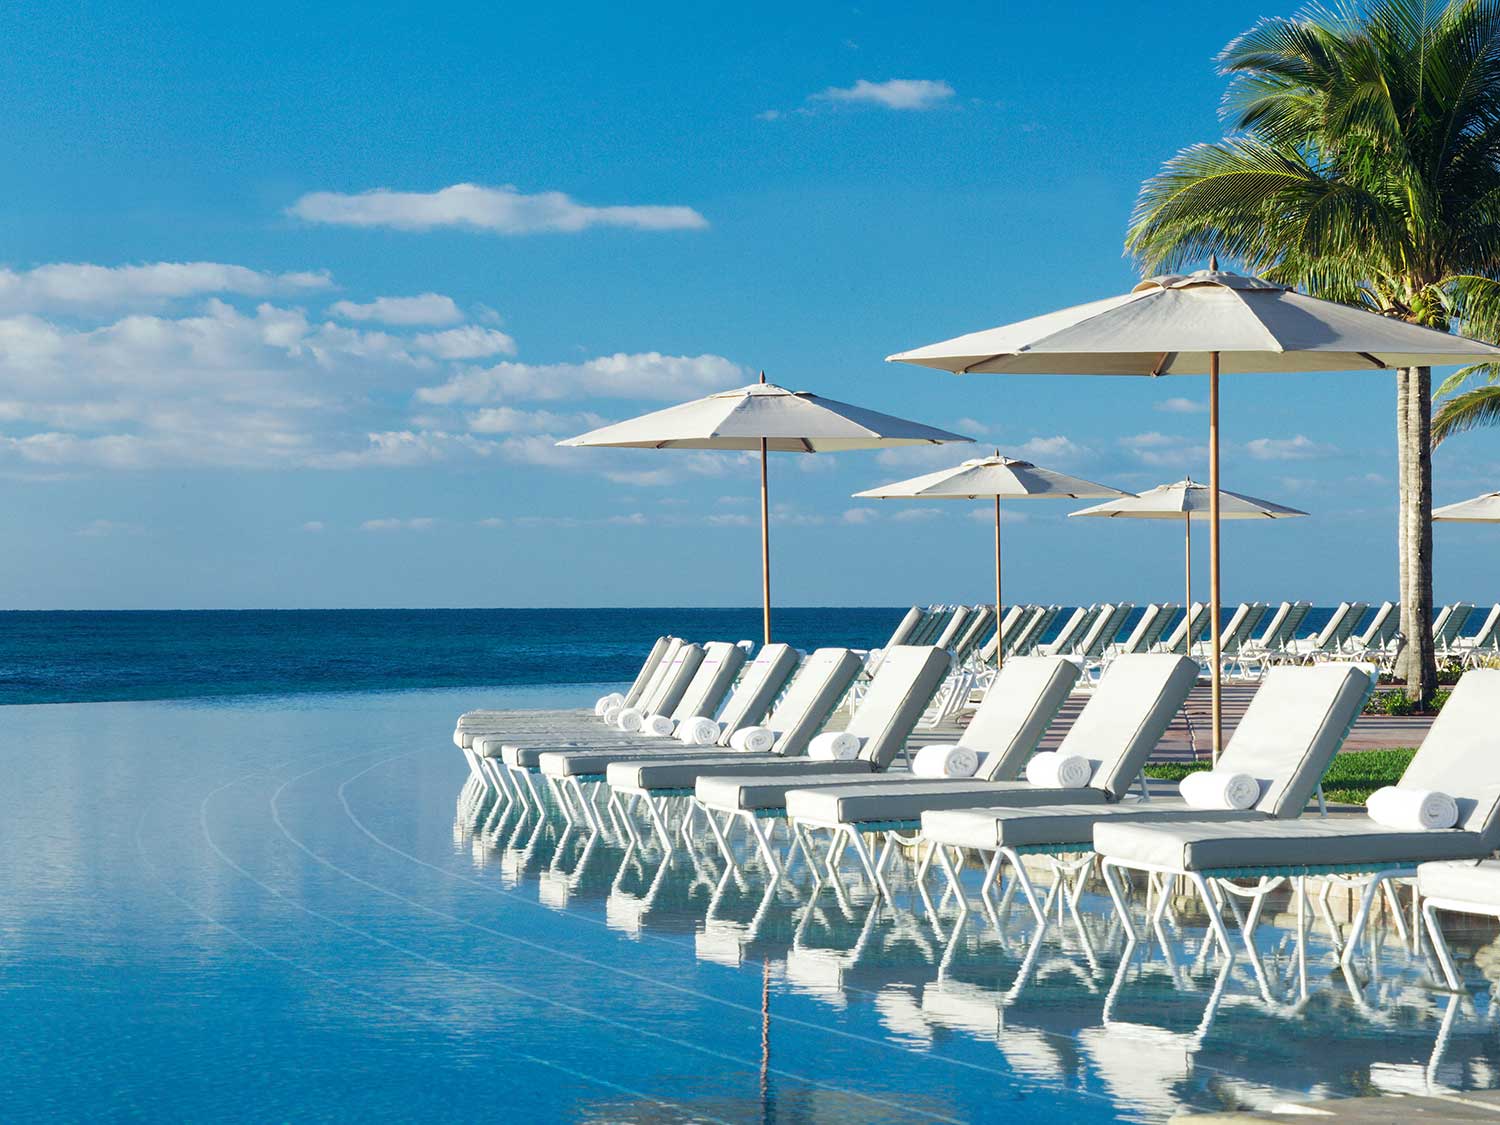 A lineup of lounge chairs next to a resort style pool.